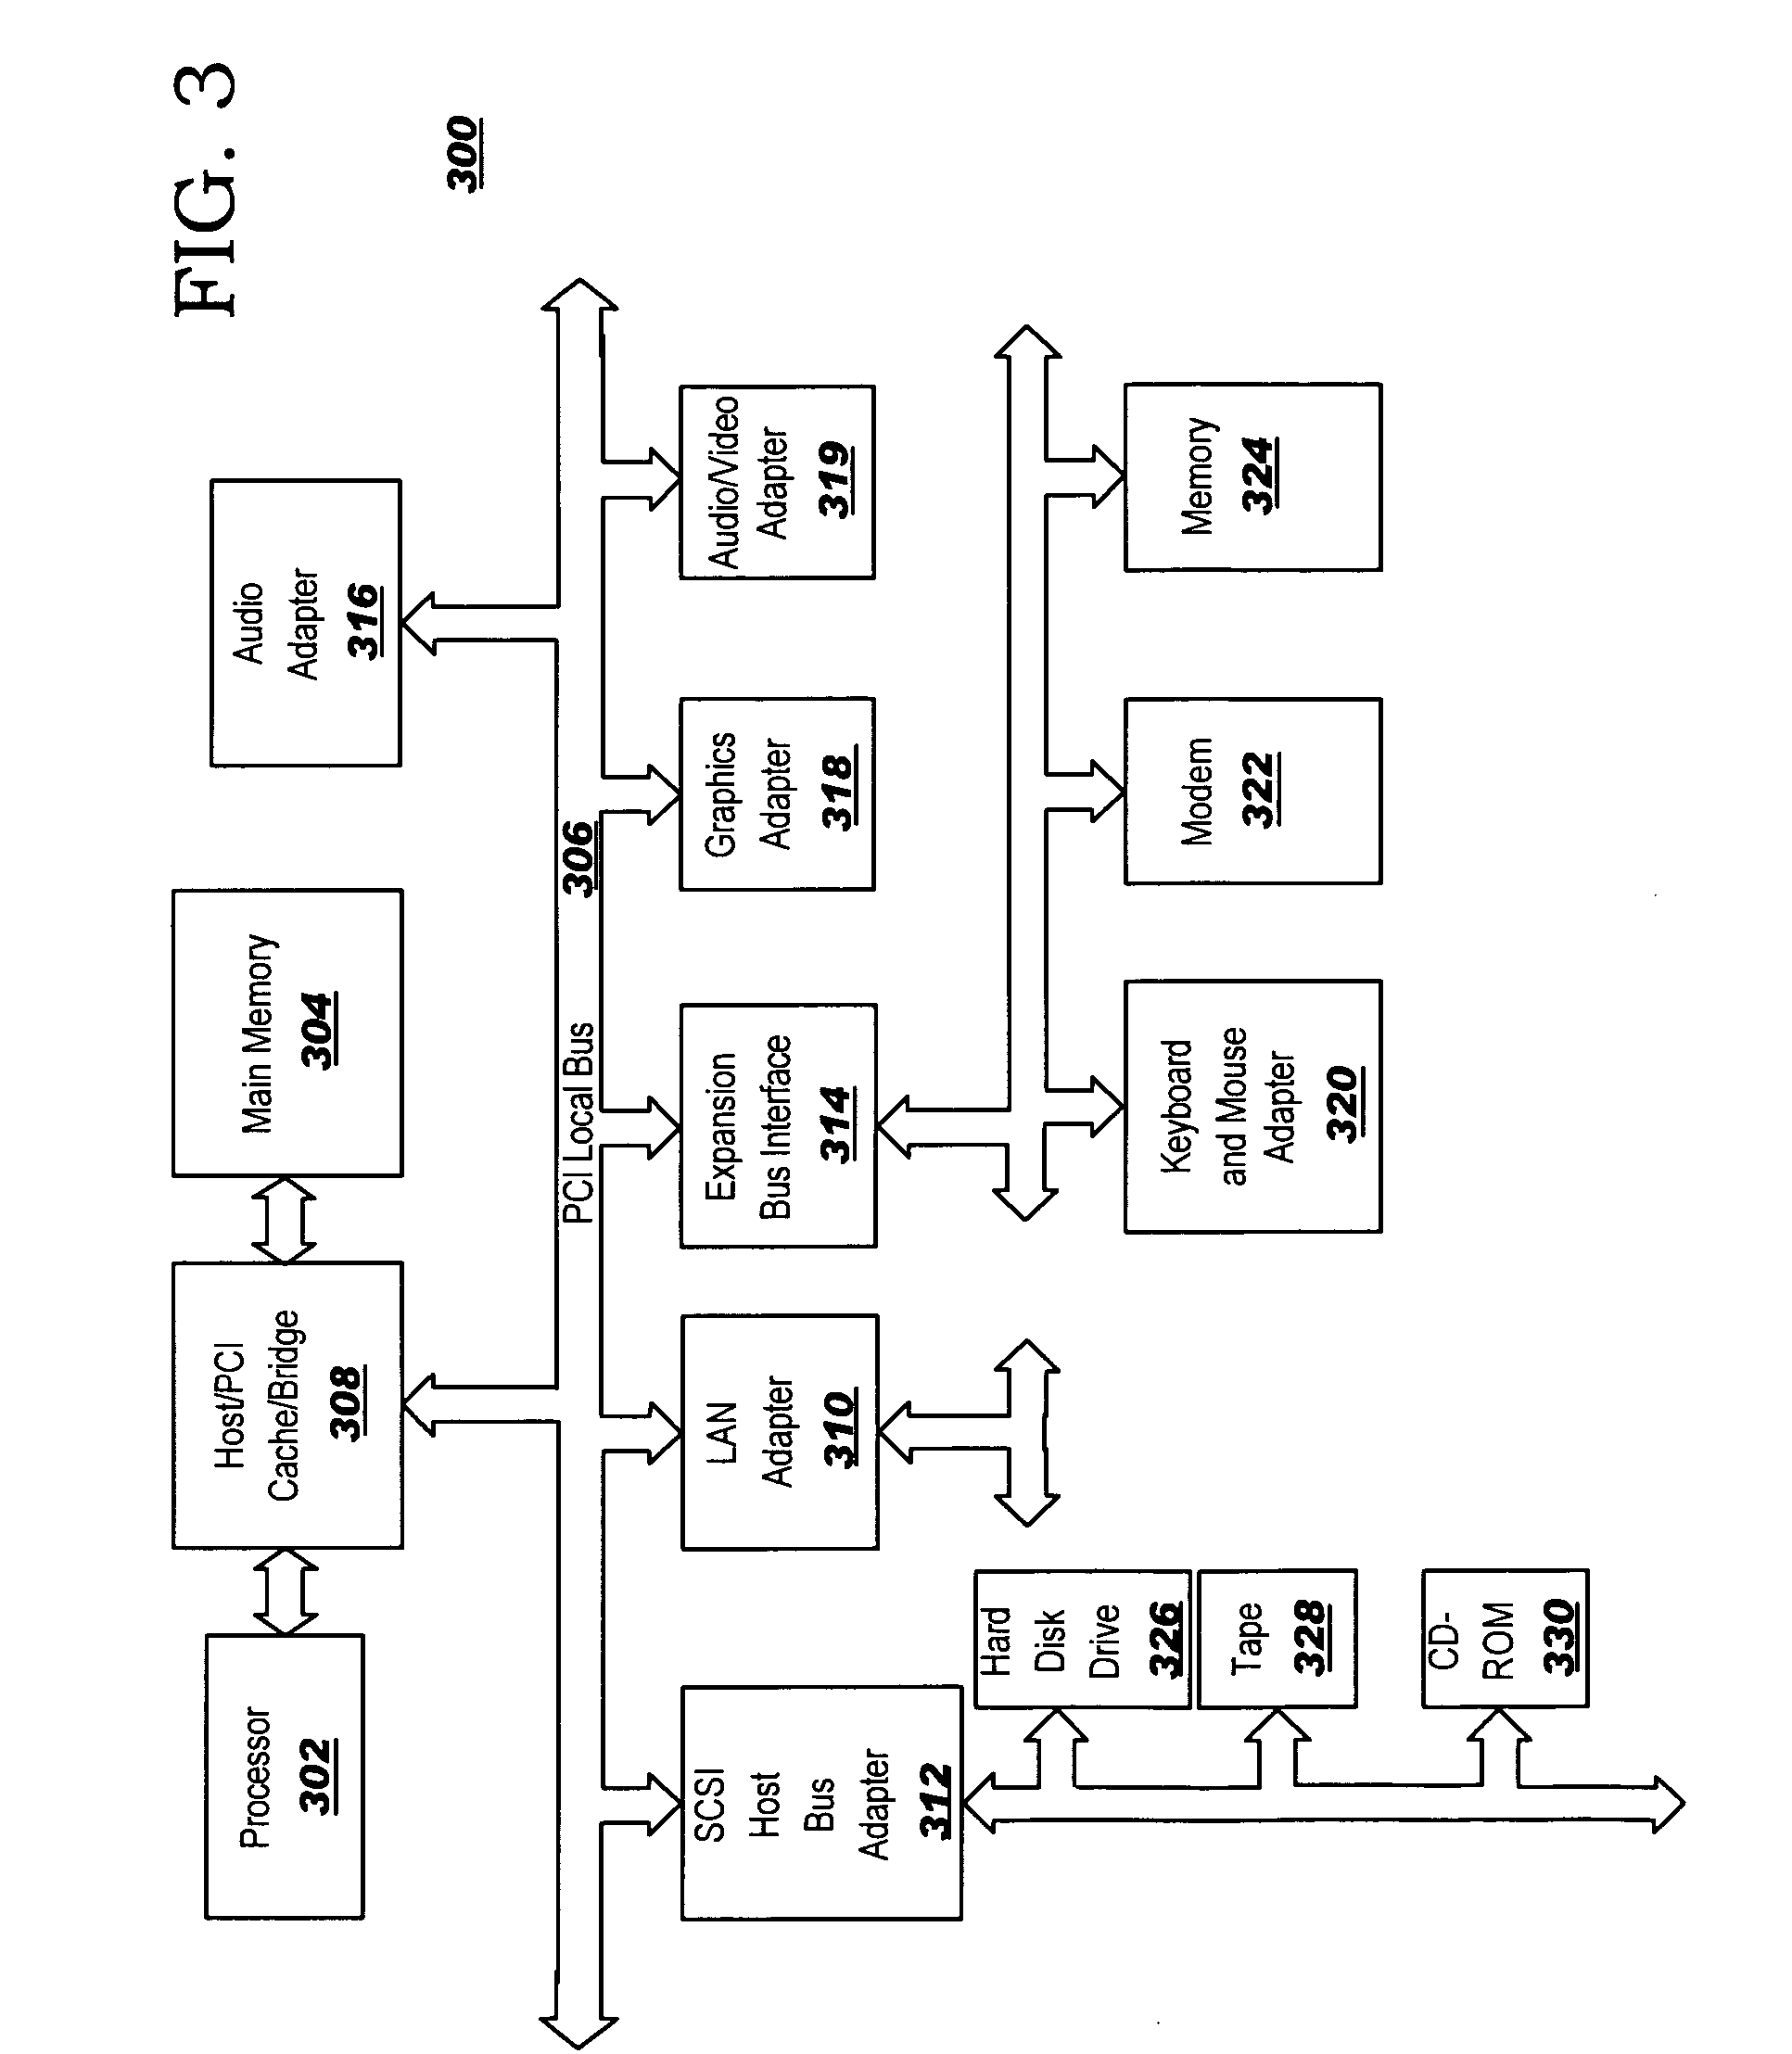 Method and computer program product for dynamic weighting of an ontological data model